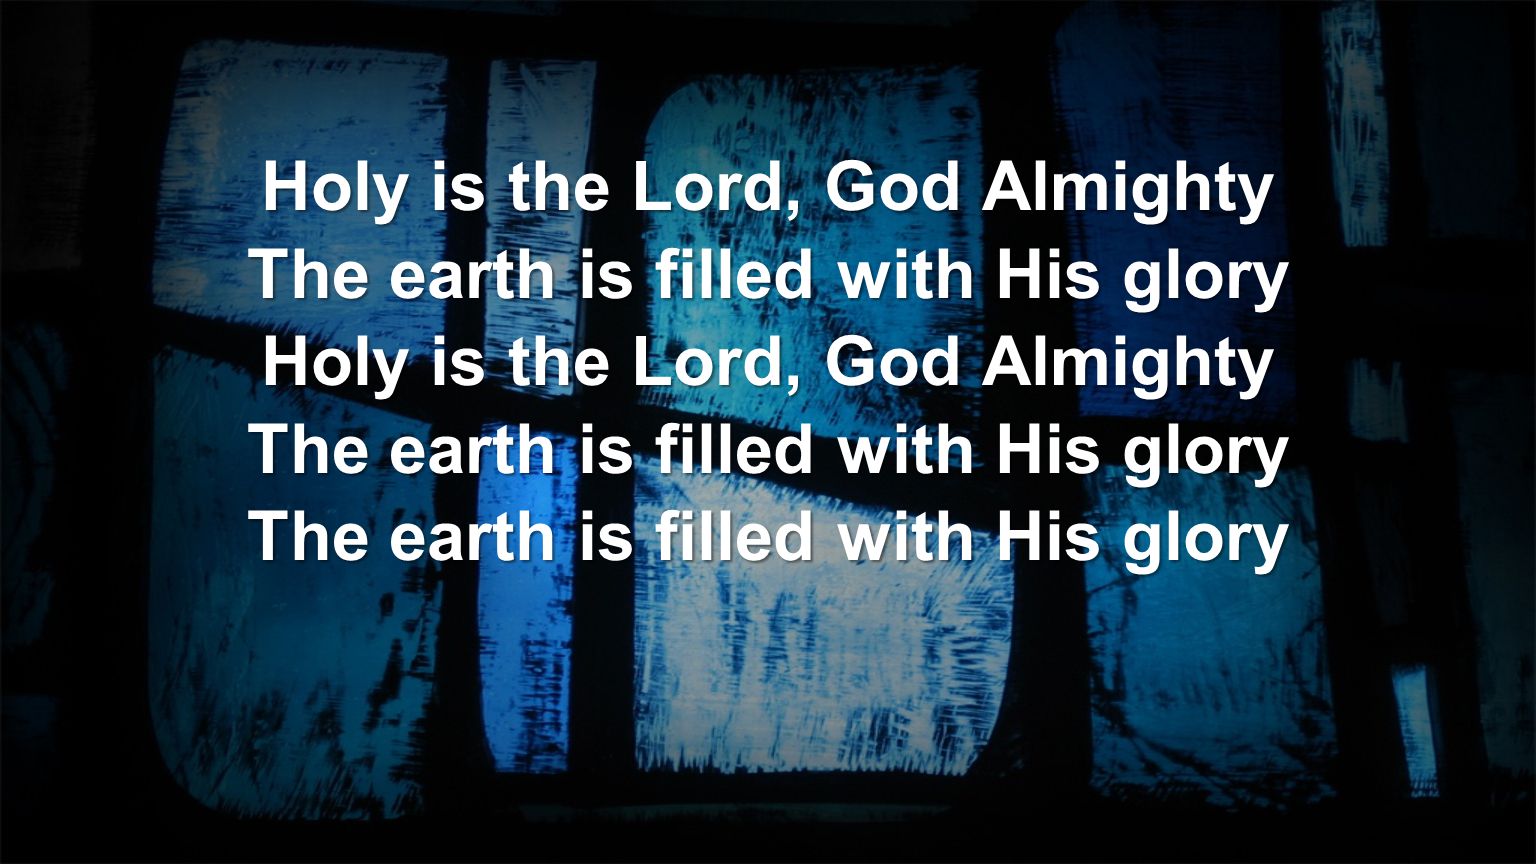 Holy is the Lord, God Almighty The earth is filled with His glory